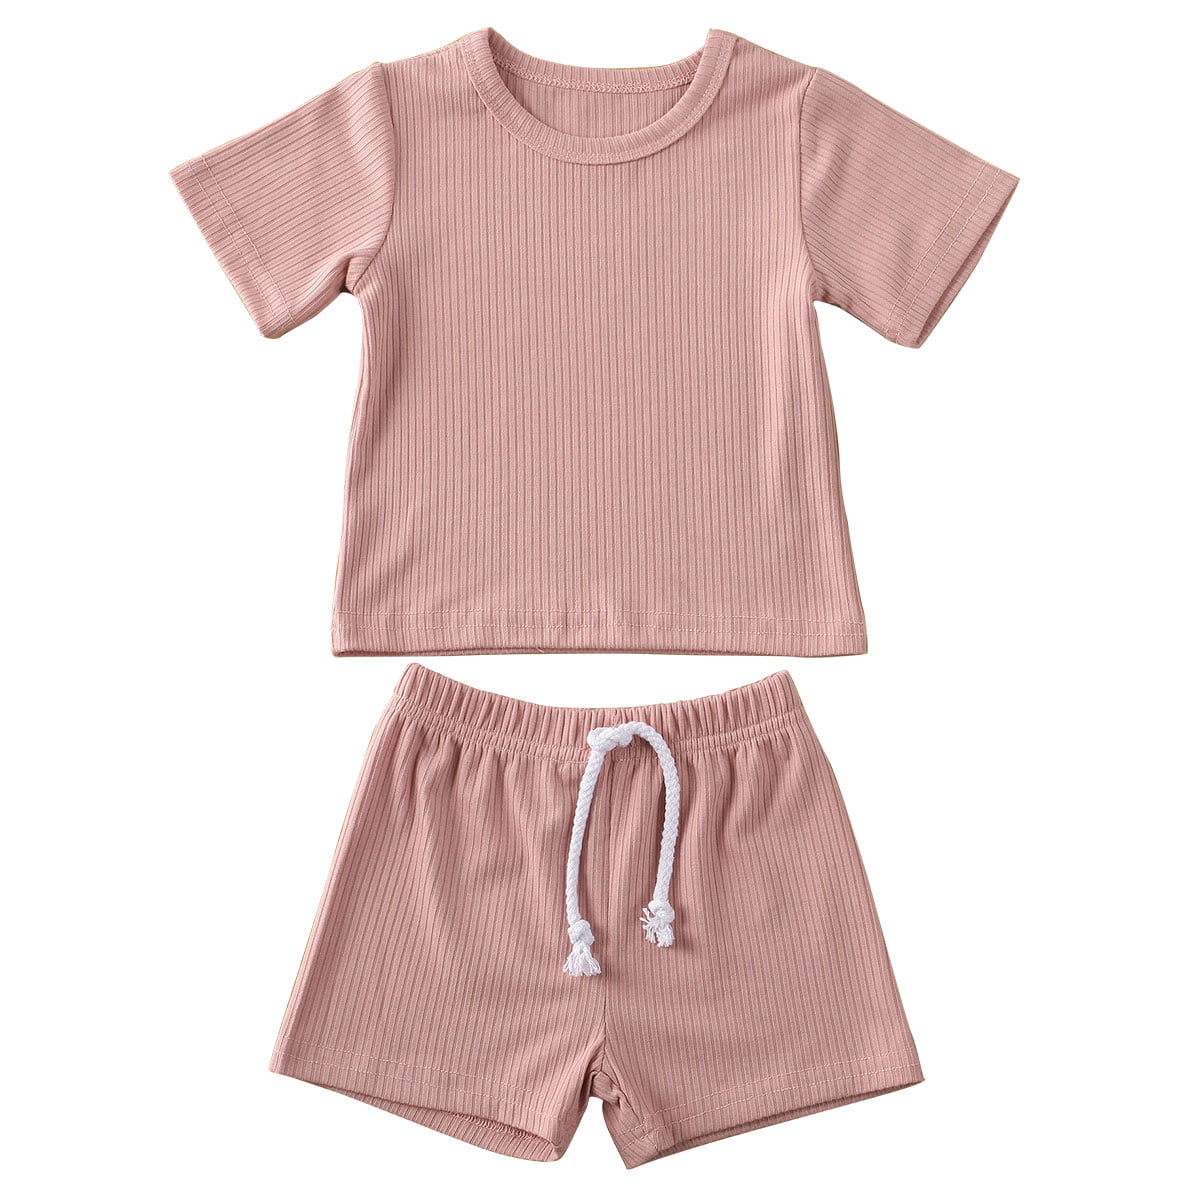 New Kids Baby Clothes Girl Tops T shirt+Shorts Pants Outfits Set Casual Summer 